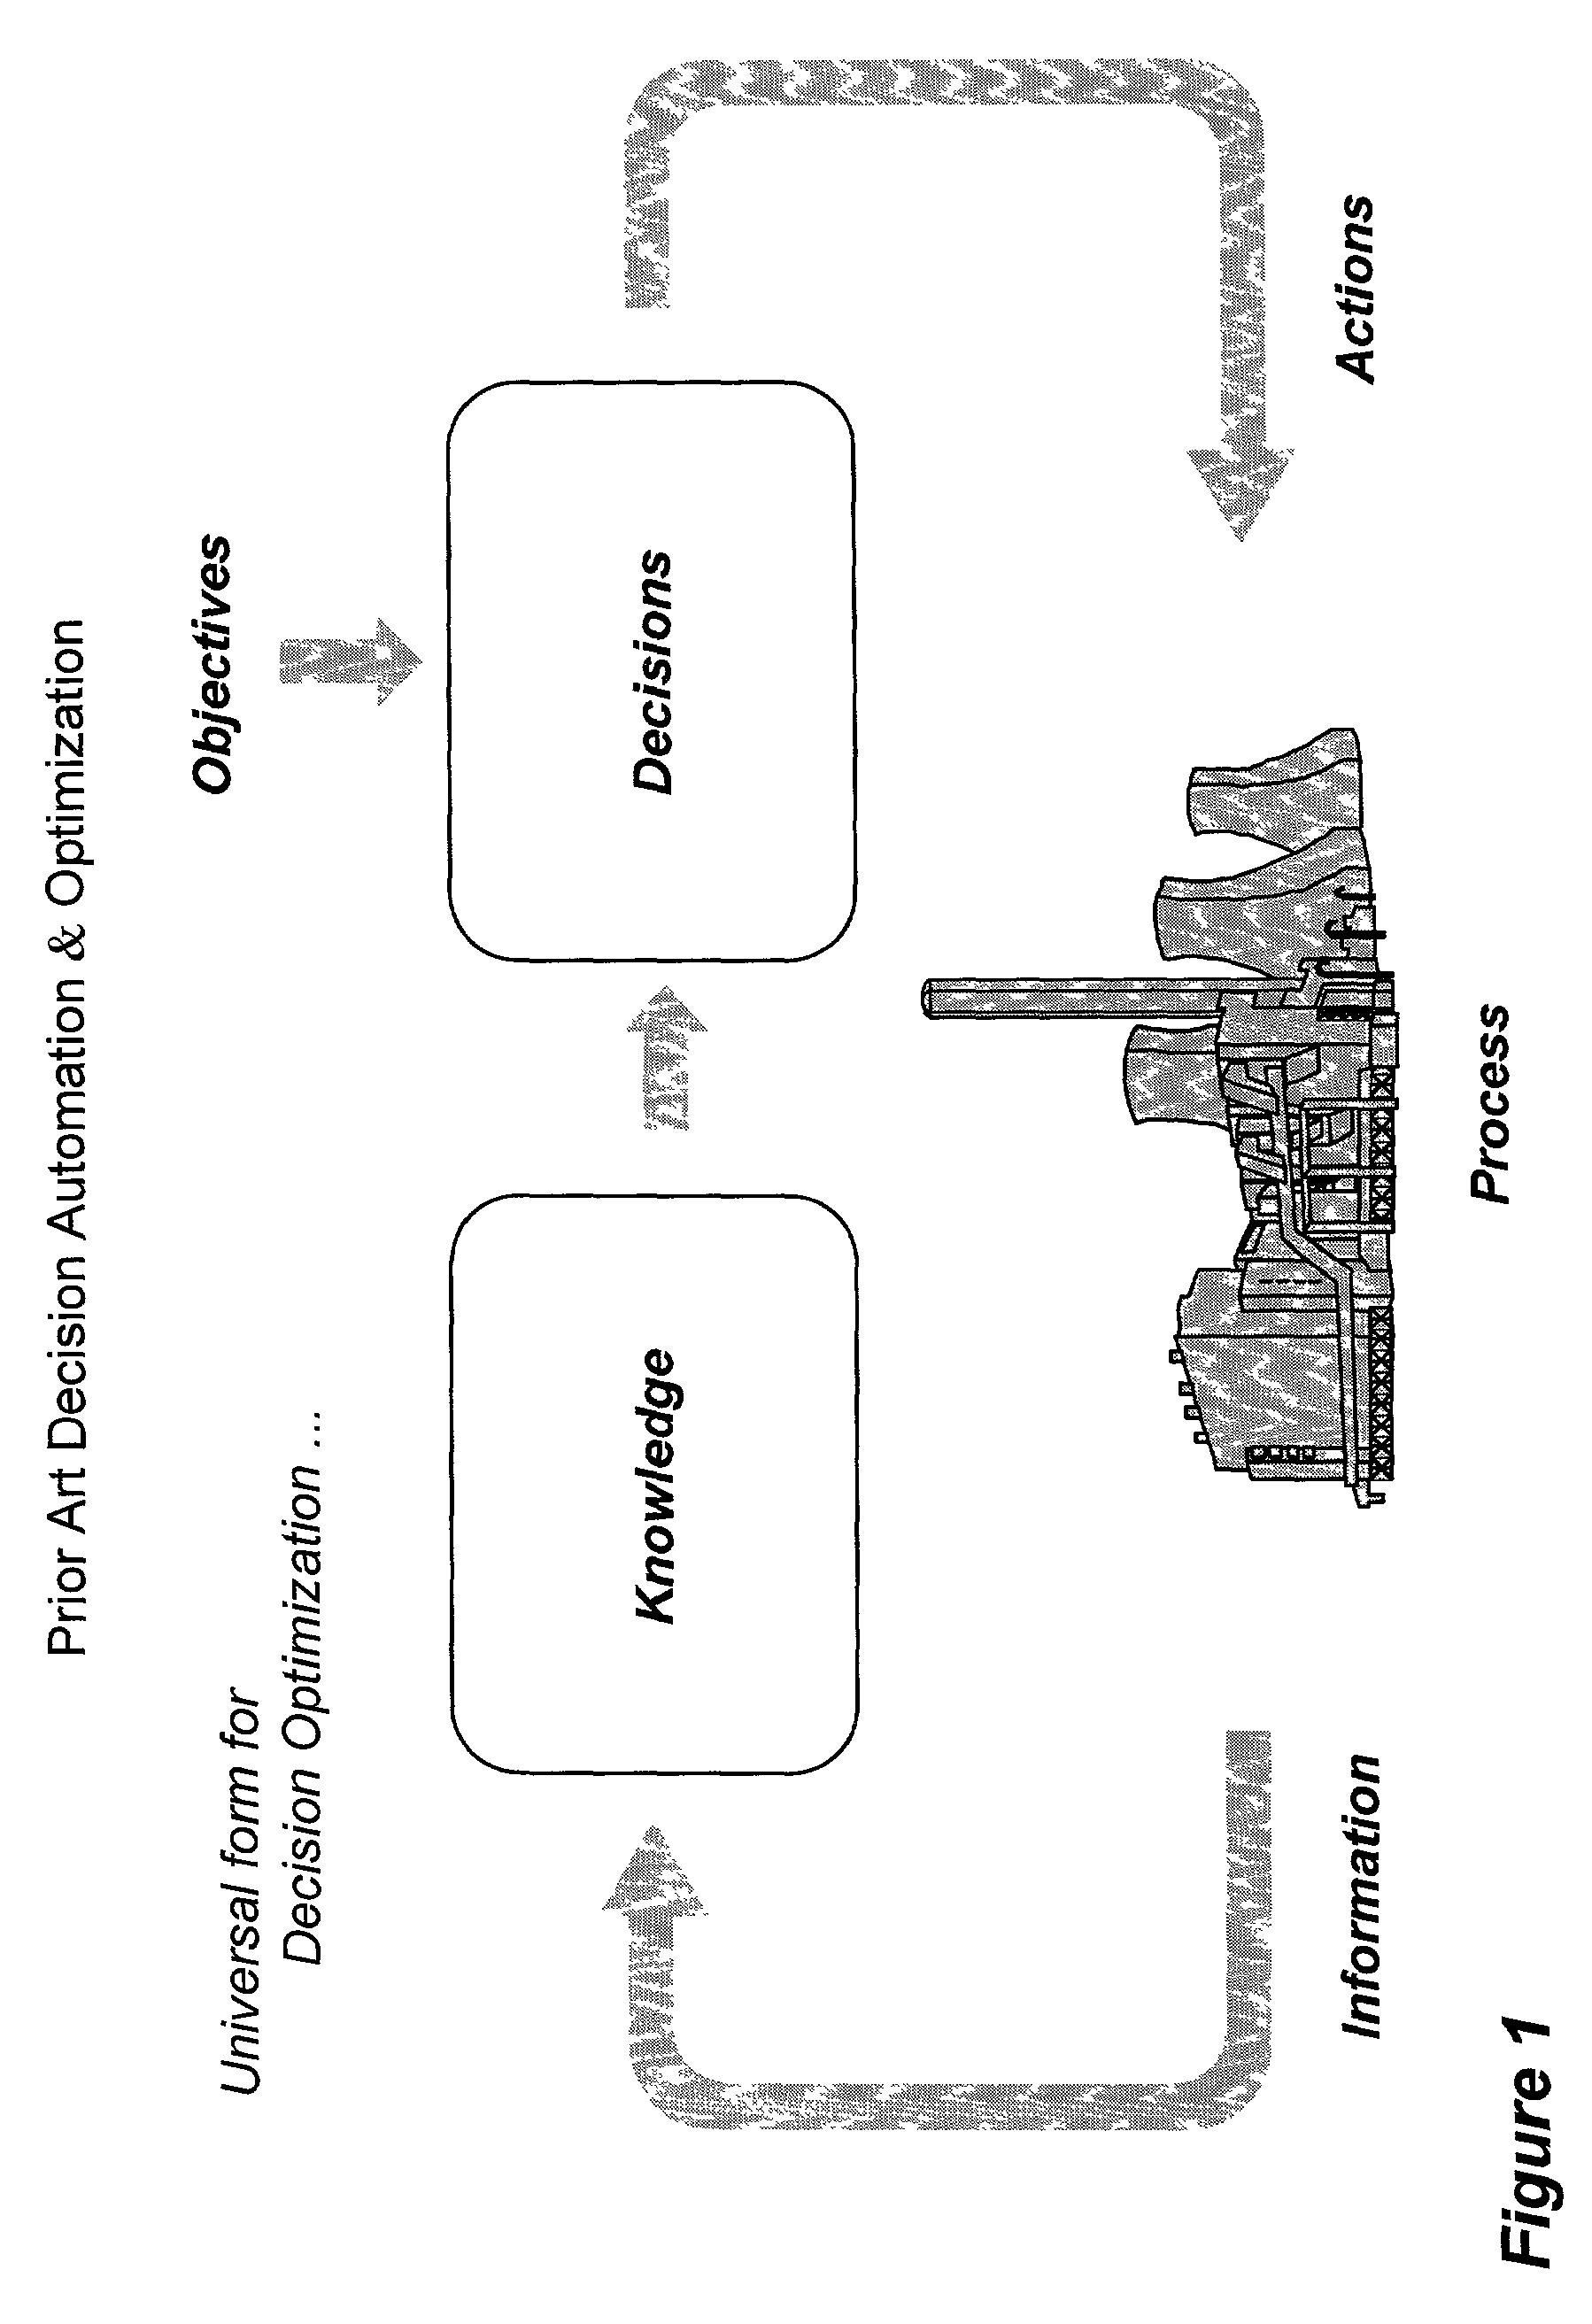 System and method for enterprise modeling, optimization and control